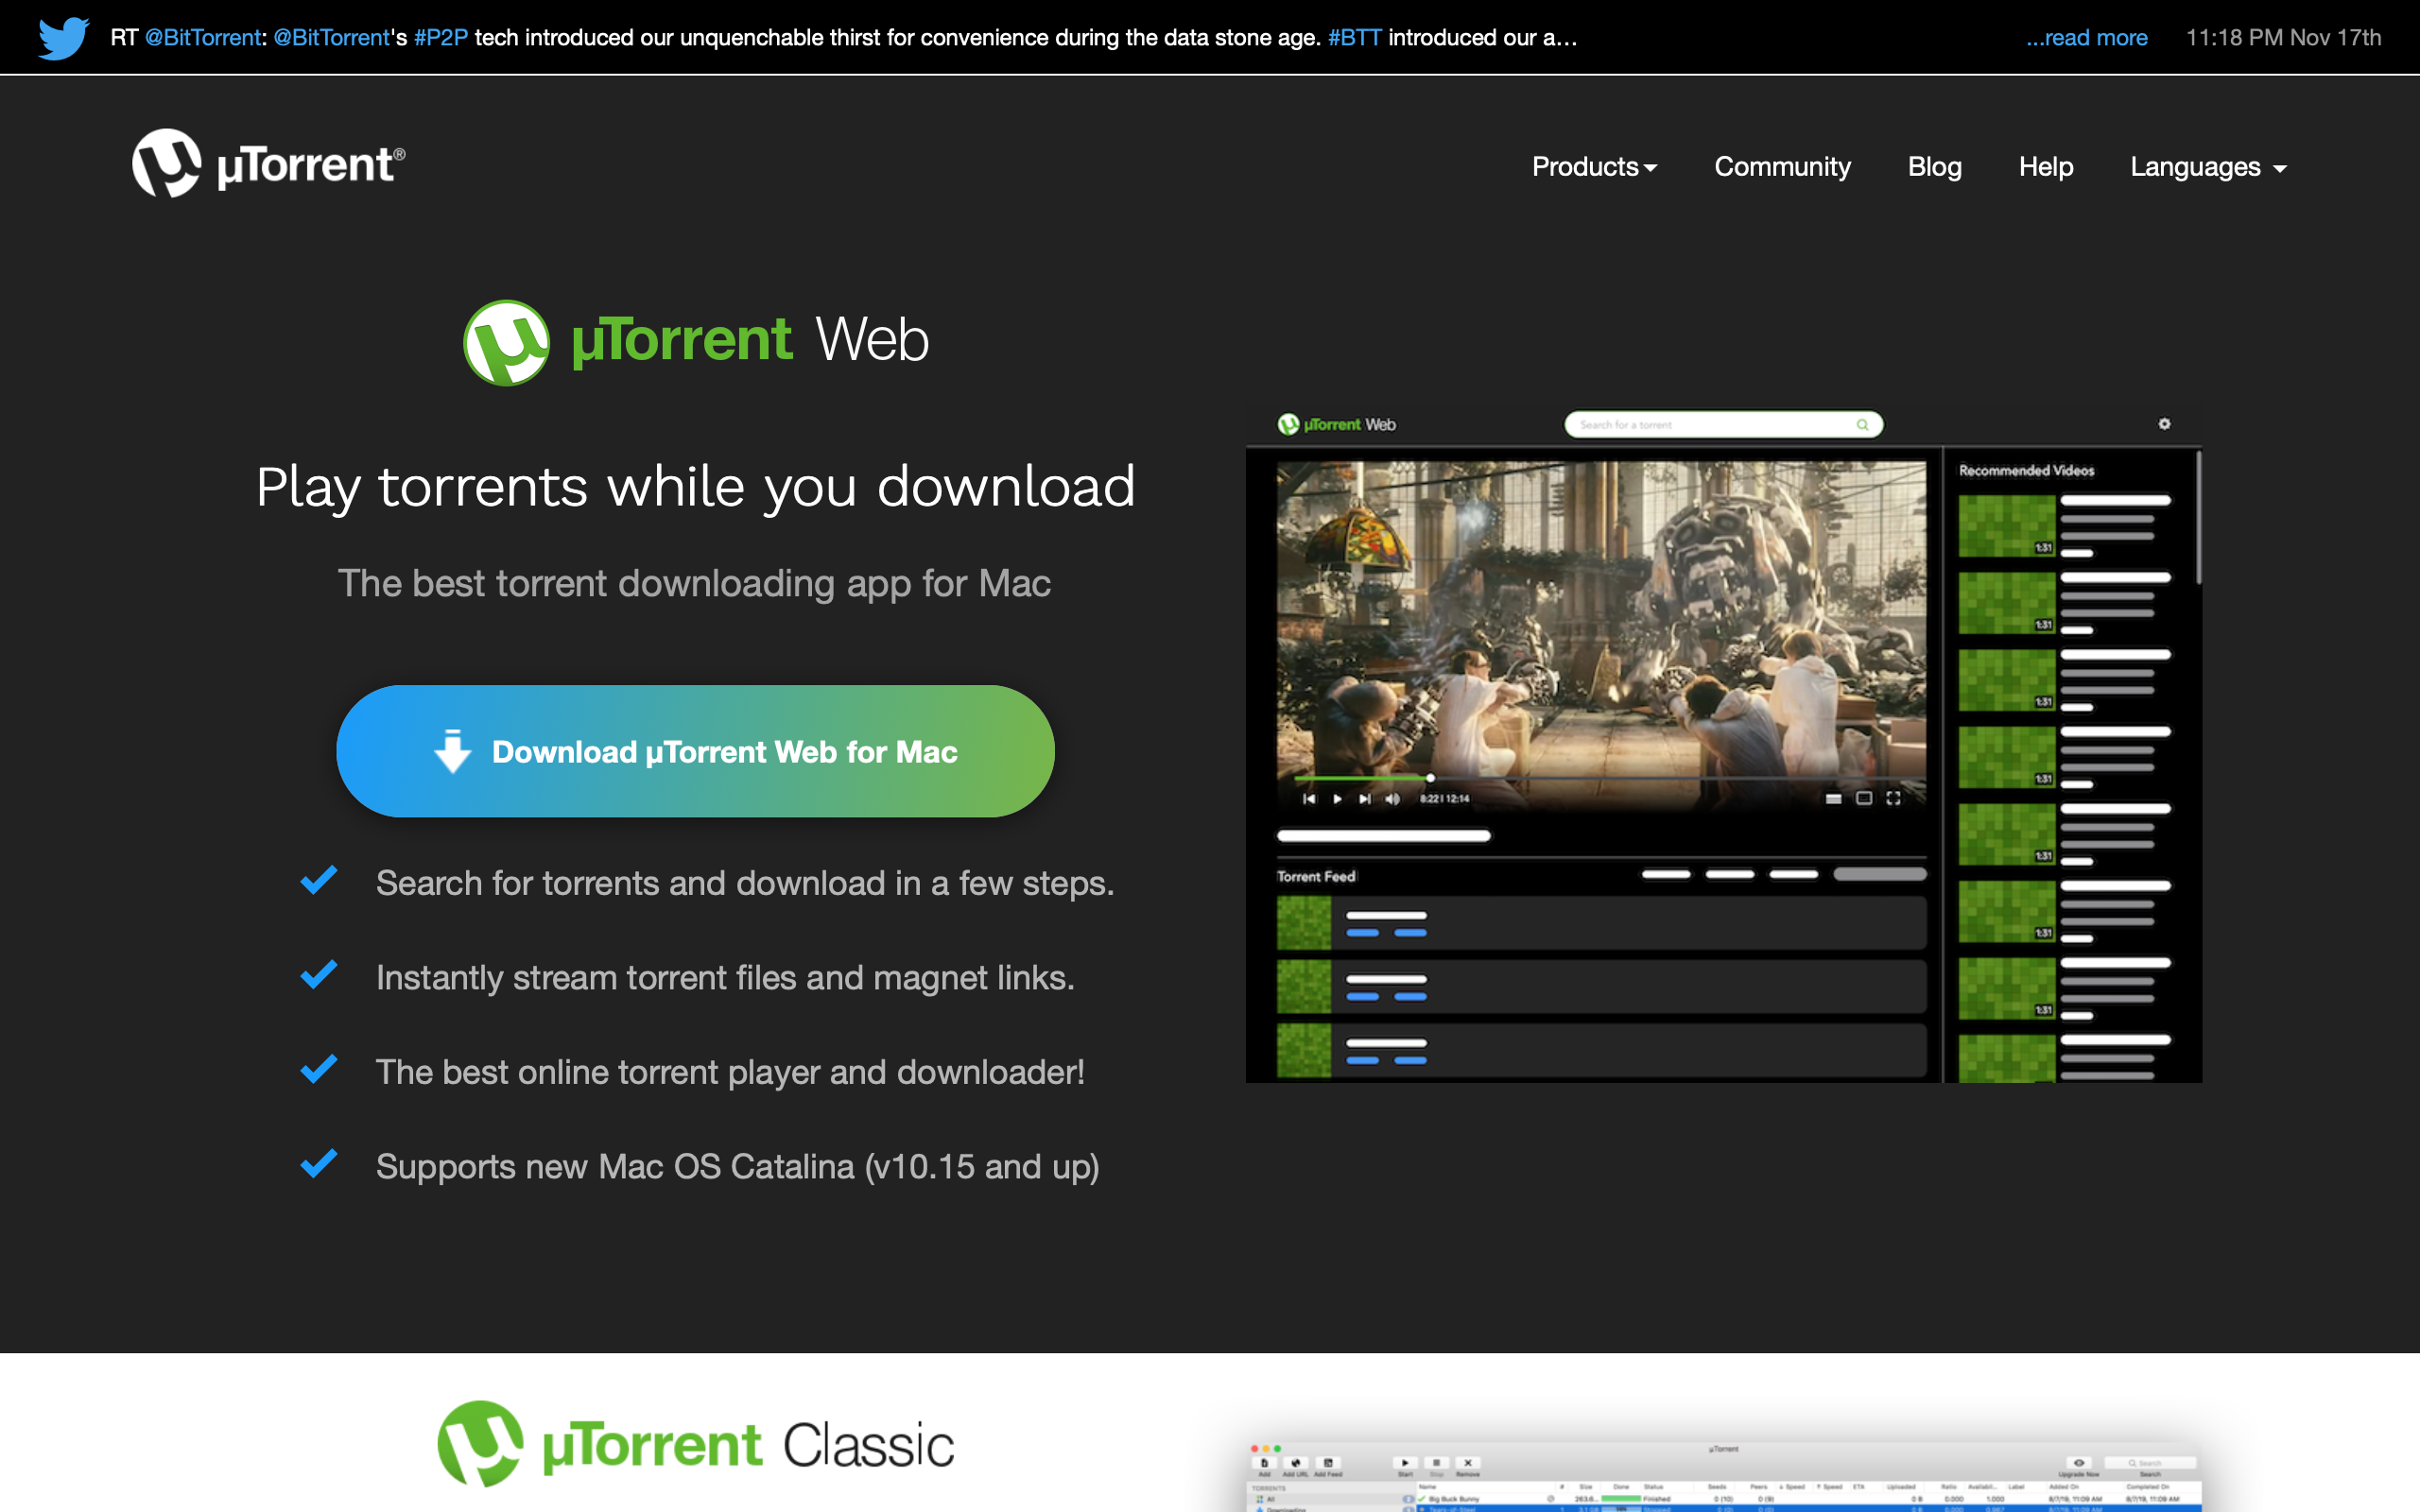 How to Use uTorrent: Our uTorrent Reviews 2022 - Stuart Kerrs